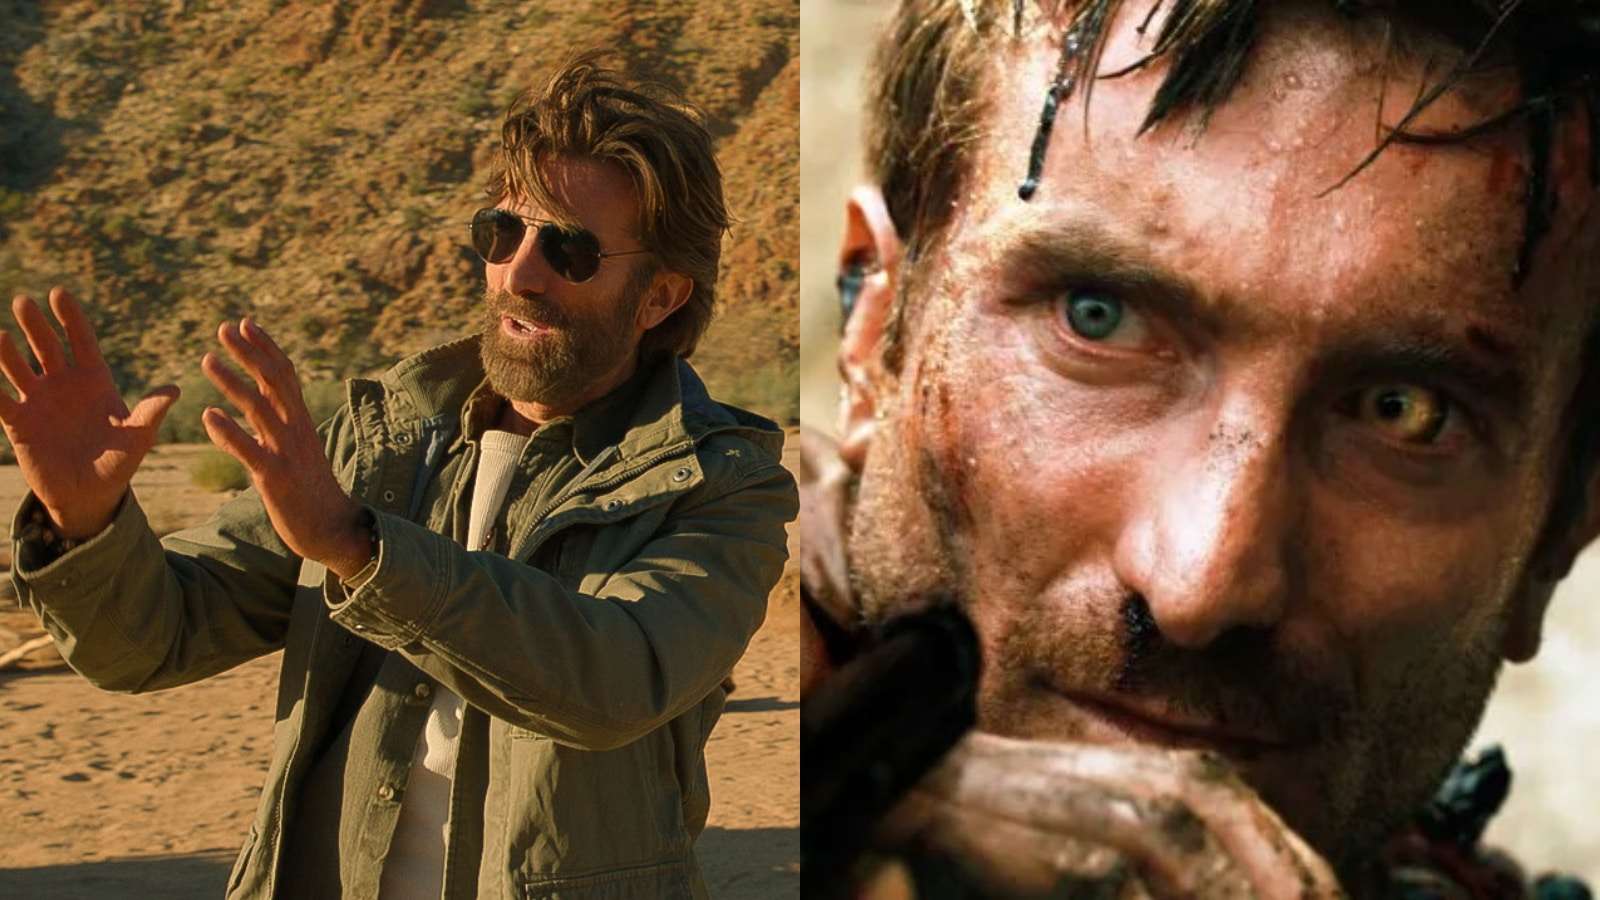 Sharlto Copley in Beast and District 9